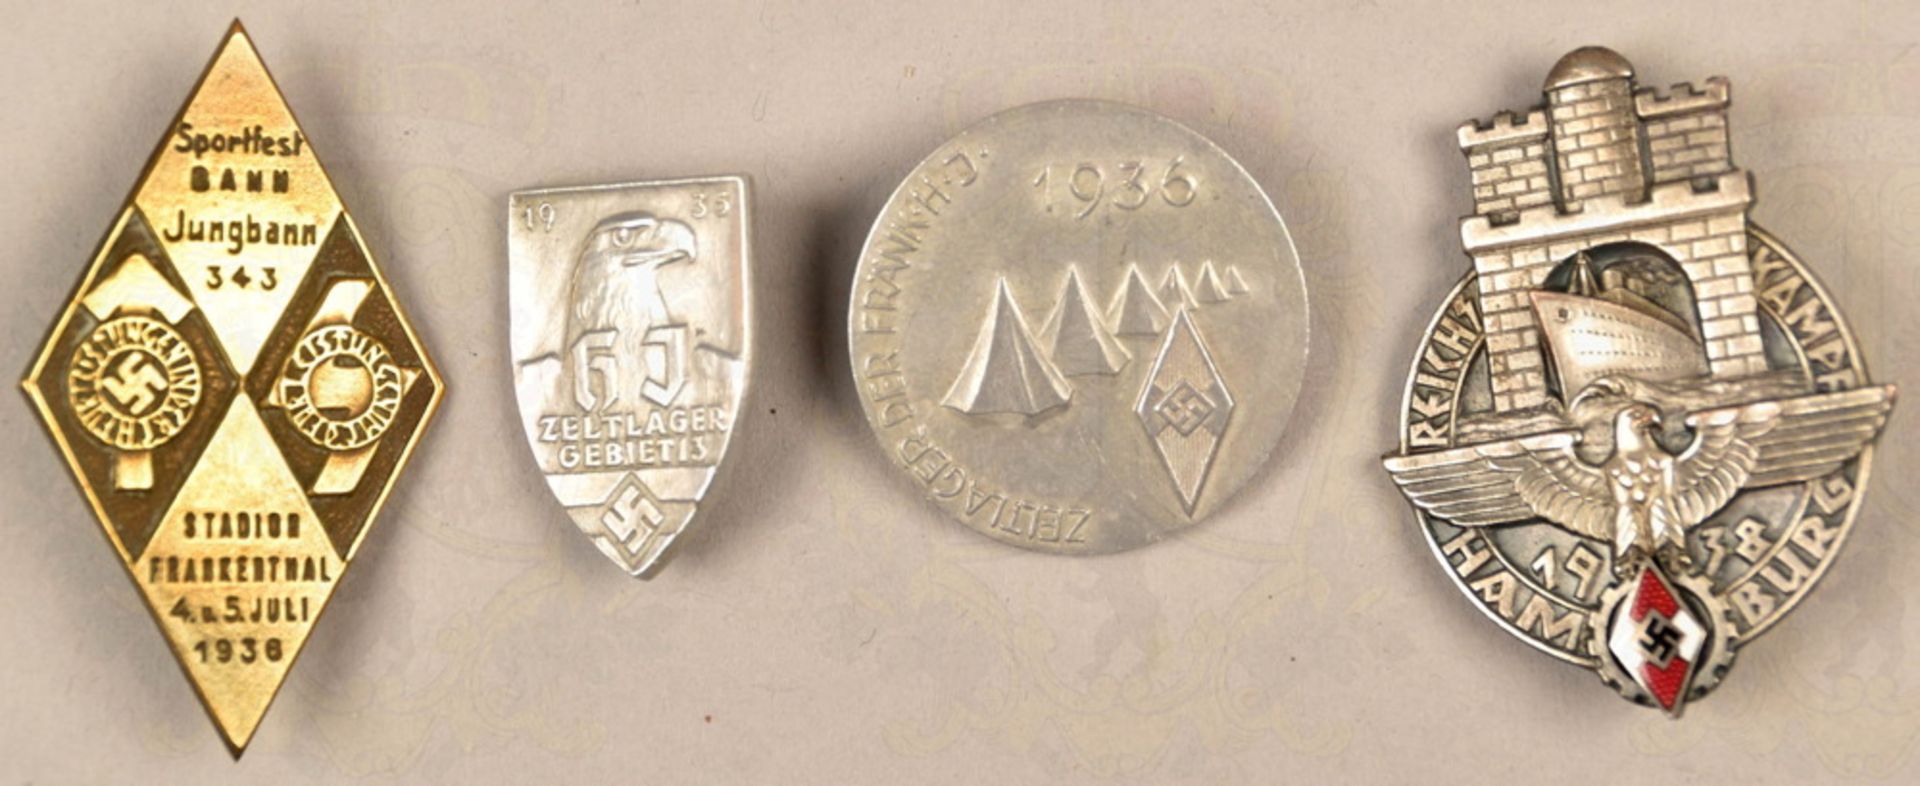 4 Hitler Youth meeting badges/tinnies 1935-1938 - Image 2 of 3